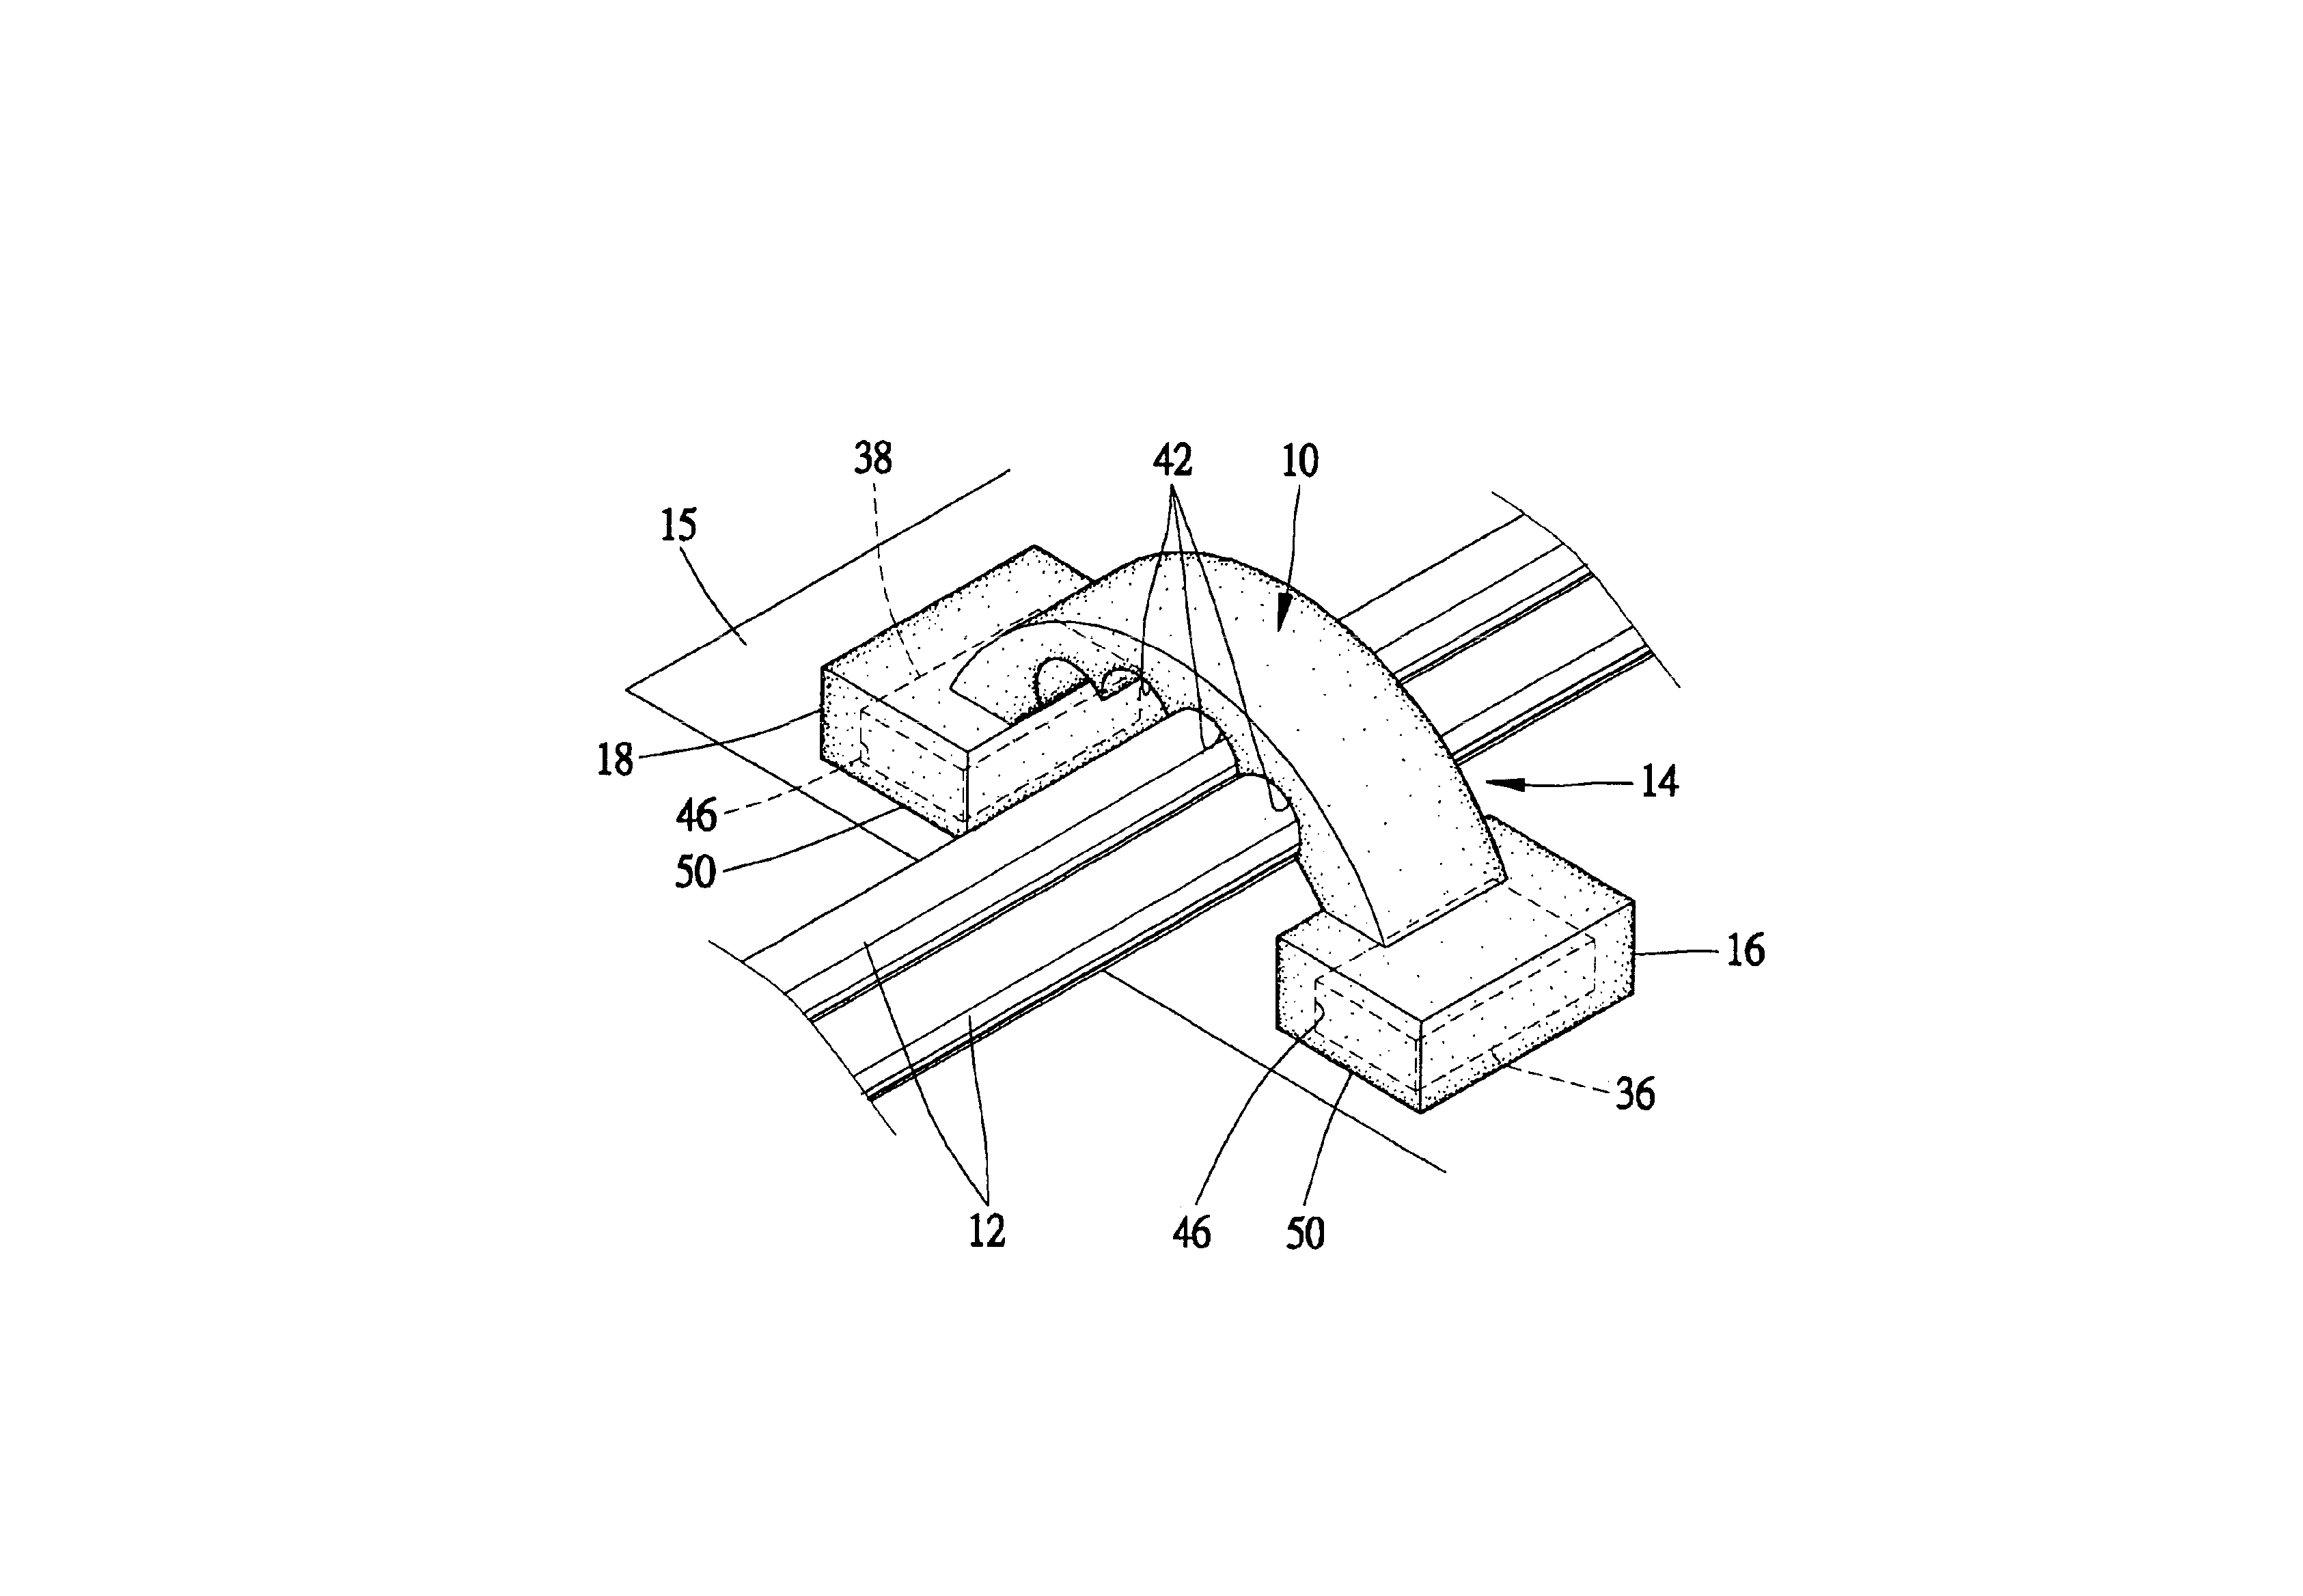 Brackets and methods for holding wires utilizing magnetic force